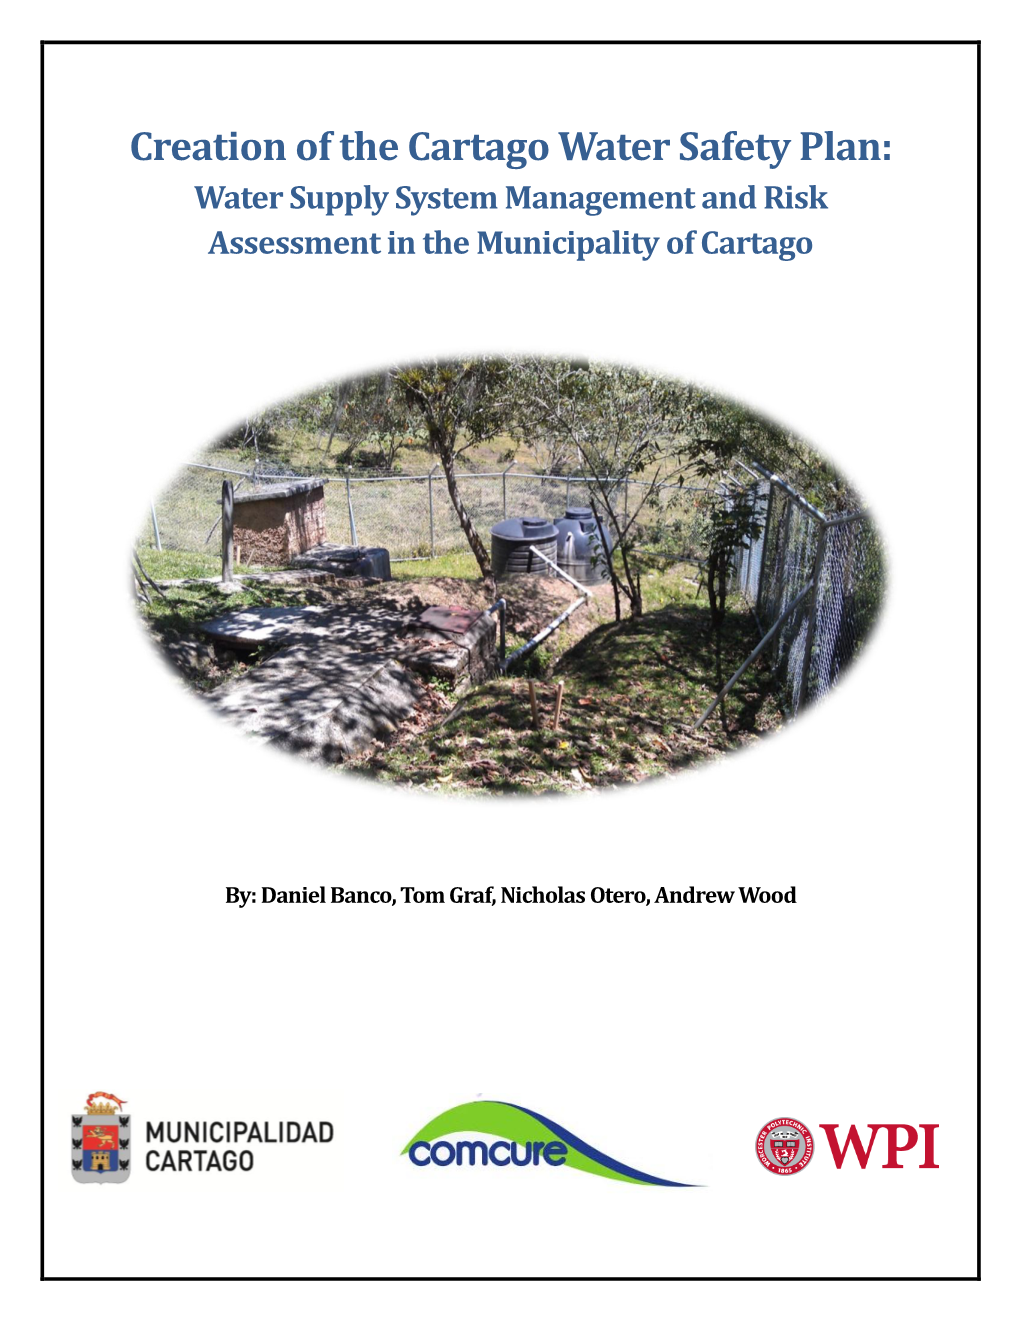 Creation of the Cartago Water Safety Plan: Water Supply System Management and Risk Assessment in the Municipality of Cartago